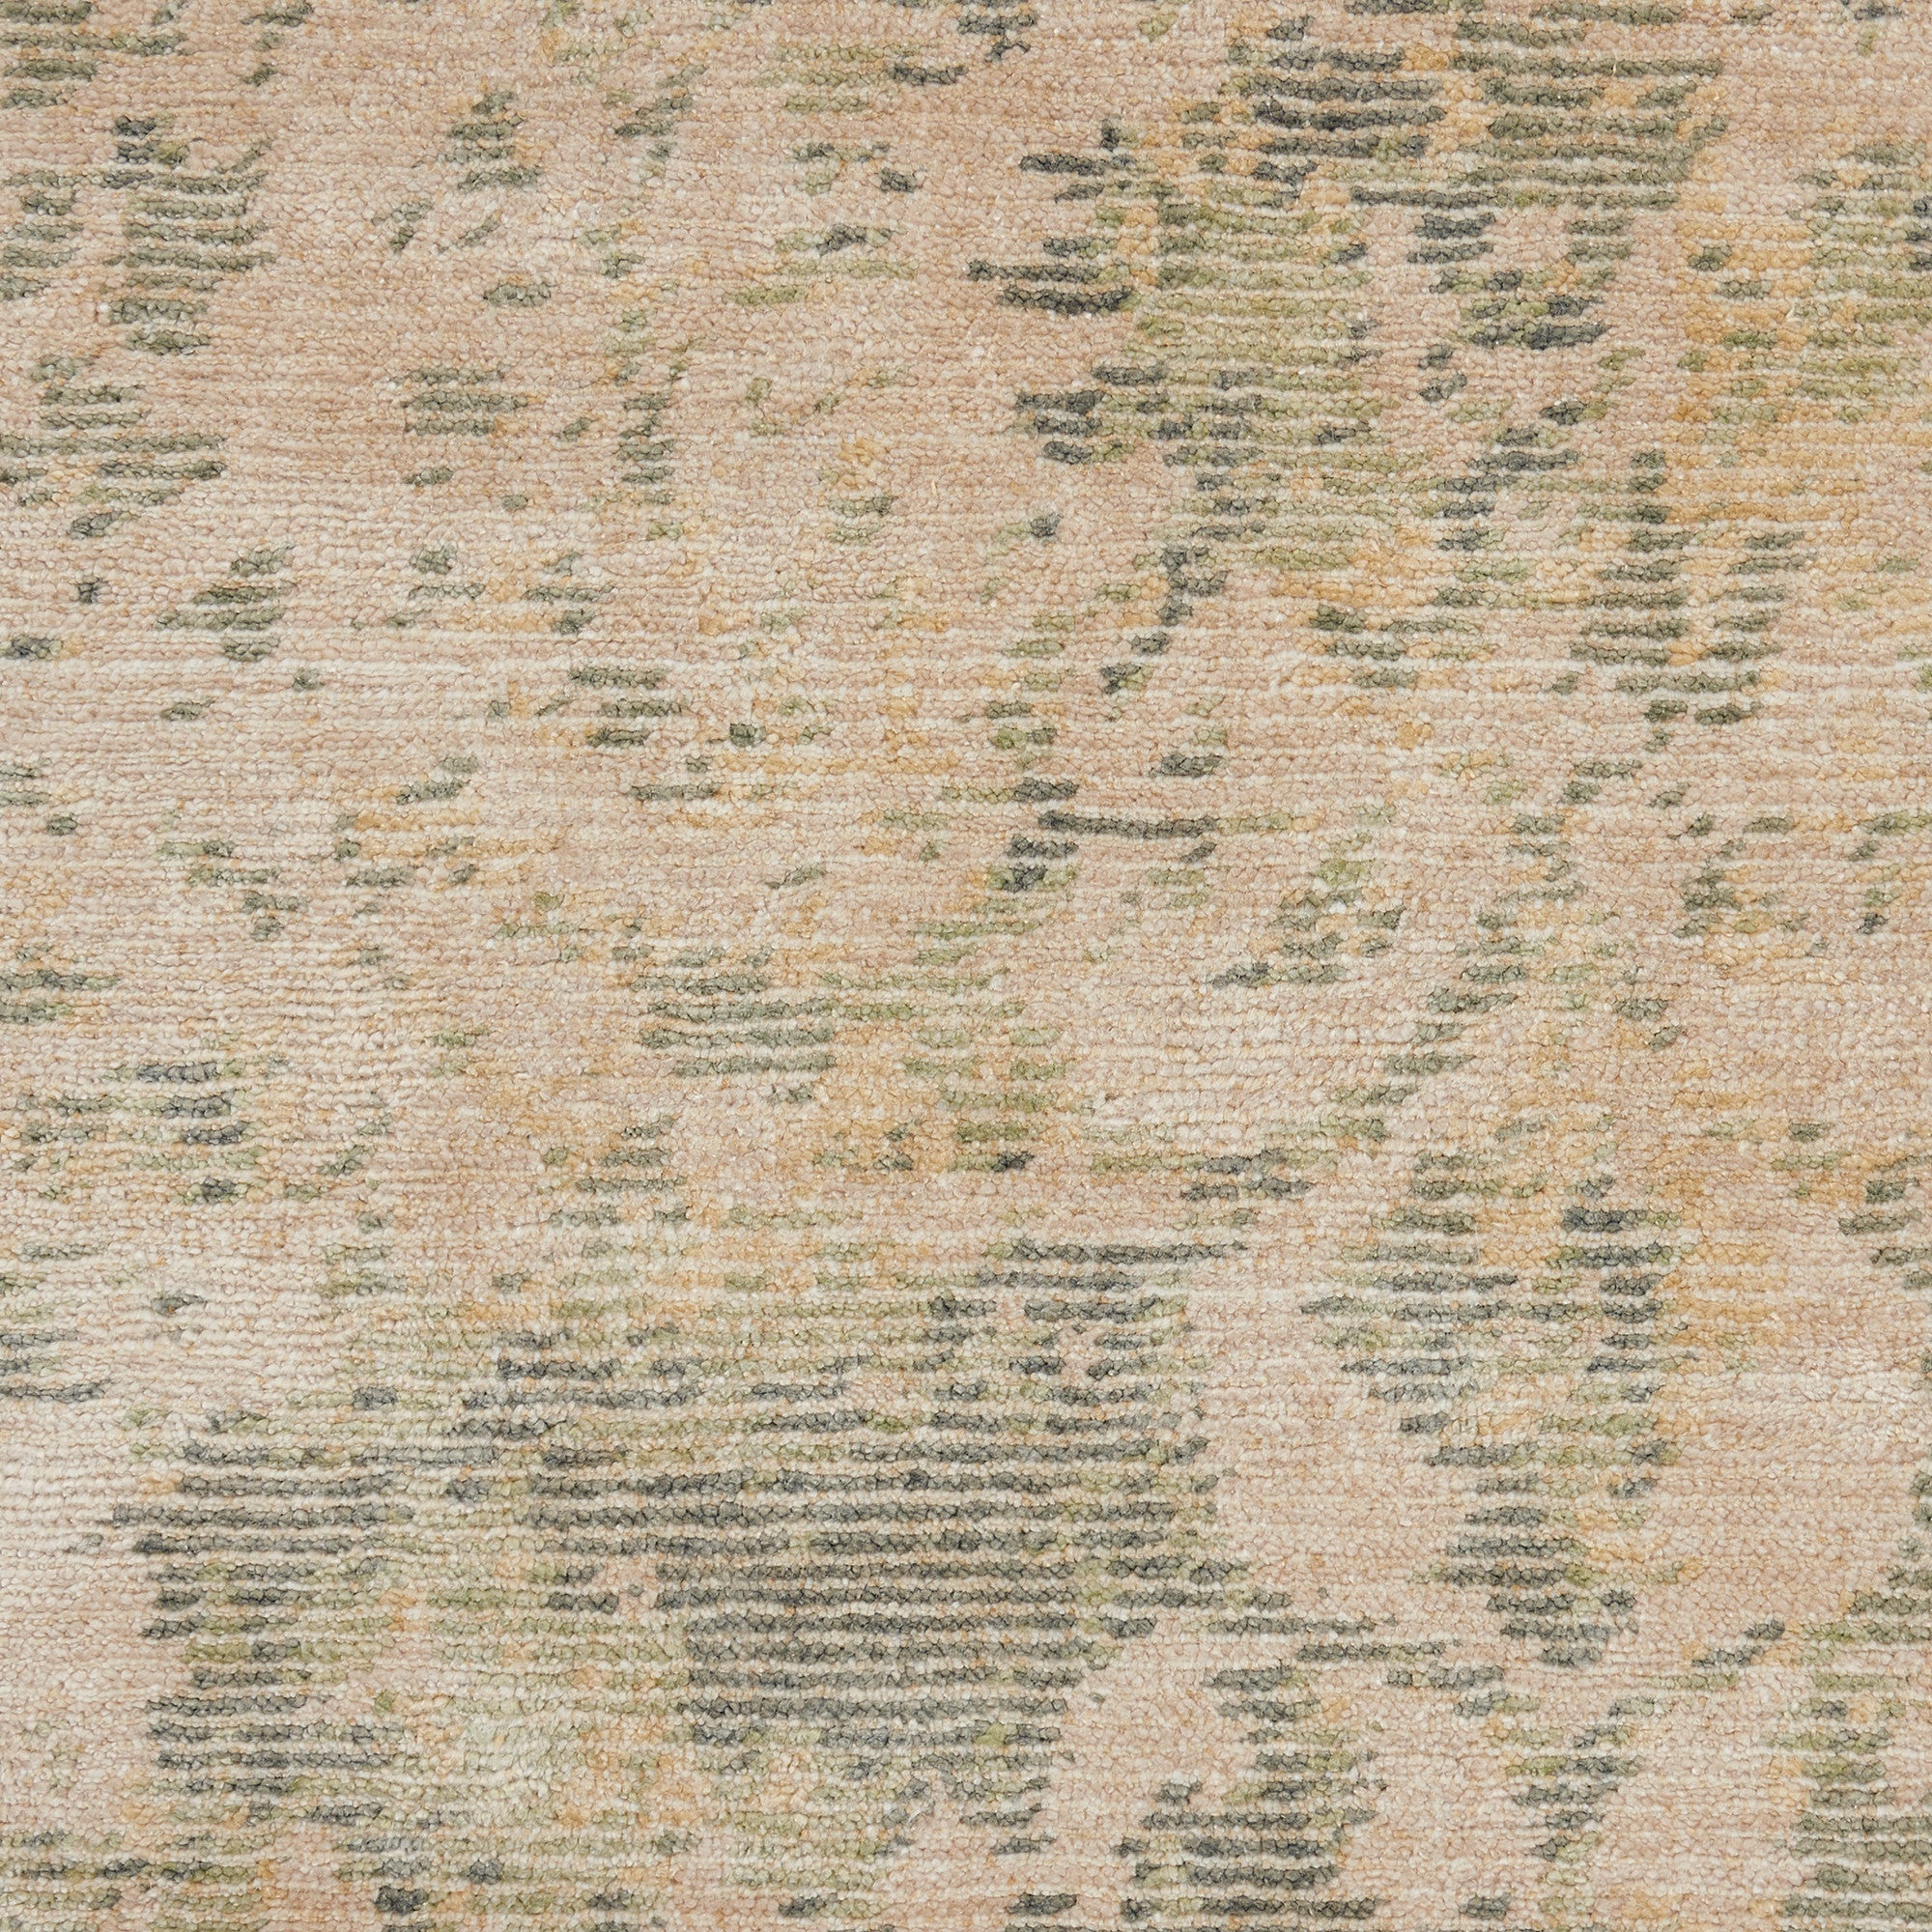 Section of fabric with intricate woven pattern resembling vintage rug.